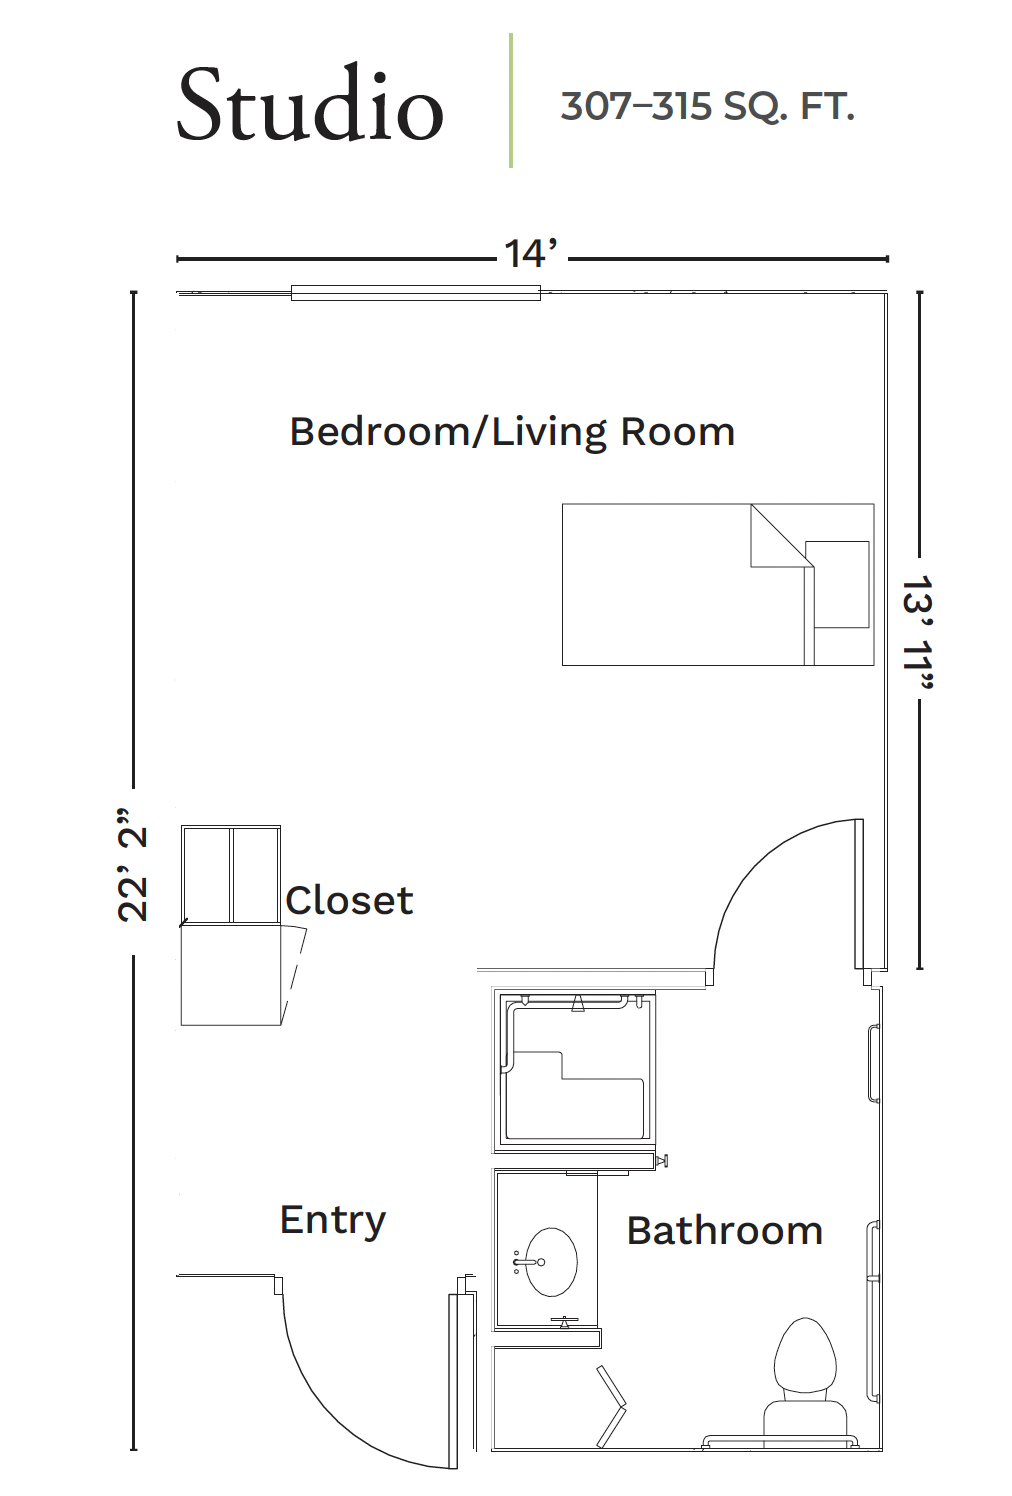 A detailed floor plan of a studio apartment, including bedroom/living room, closet, bathroom, and entry.